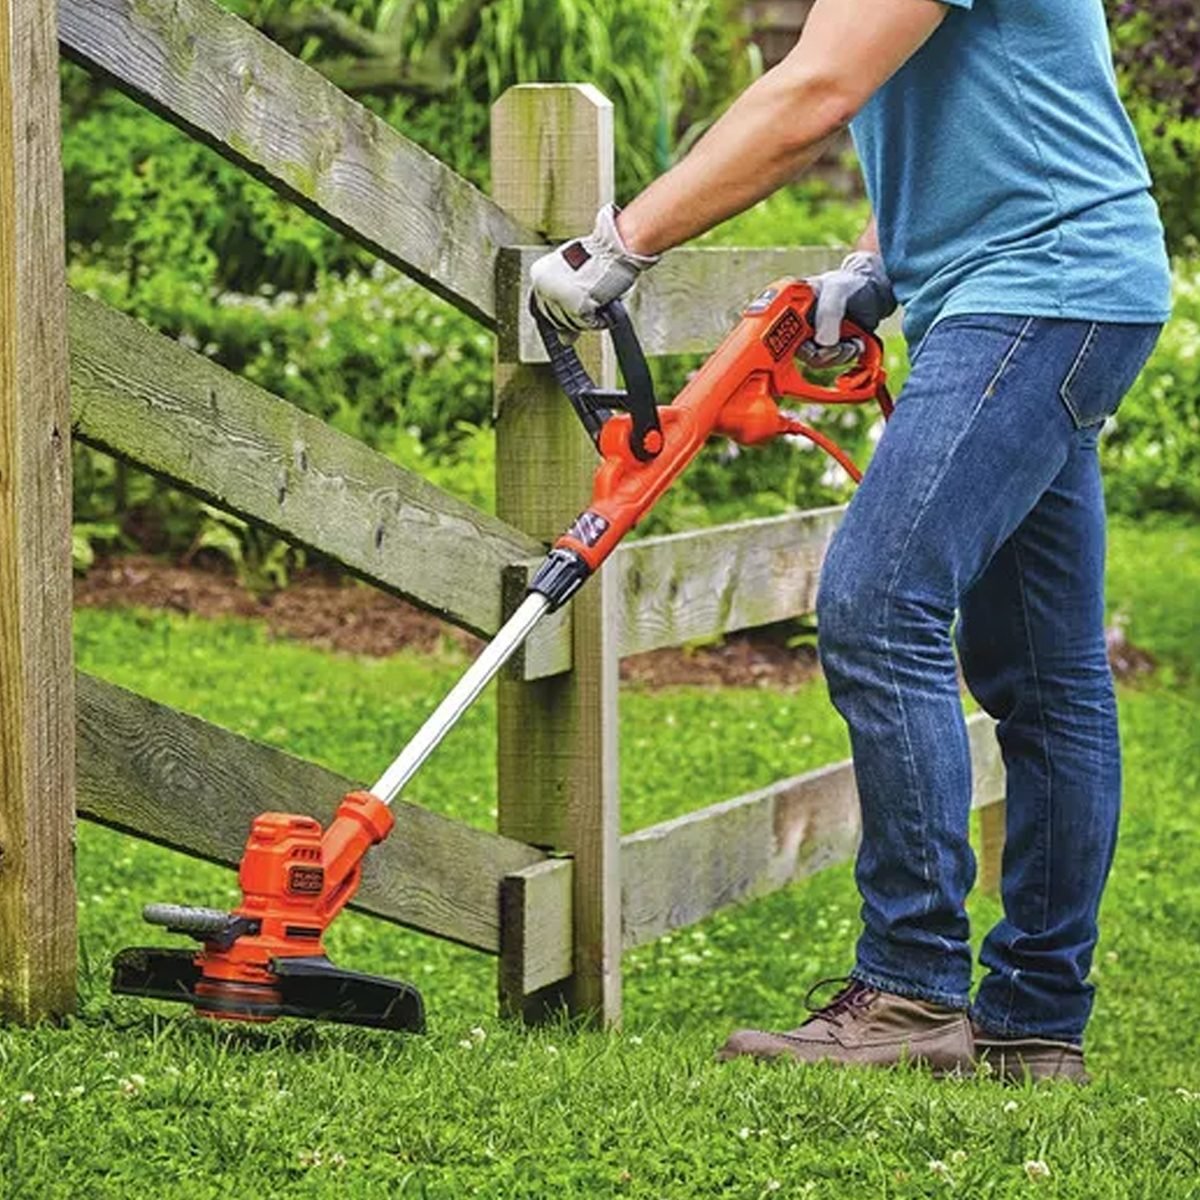 The 9 Best String Trimmers for Edging Grass and Removing Weeds